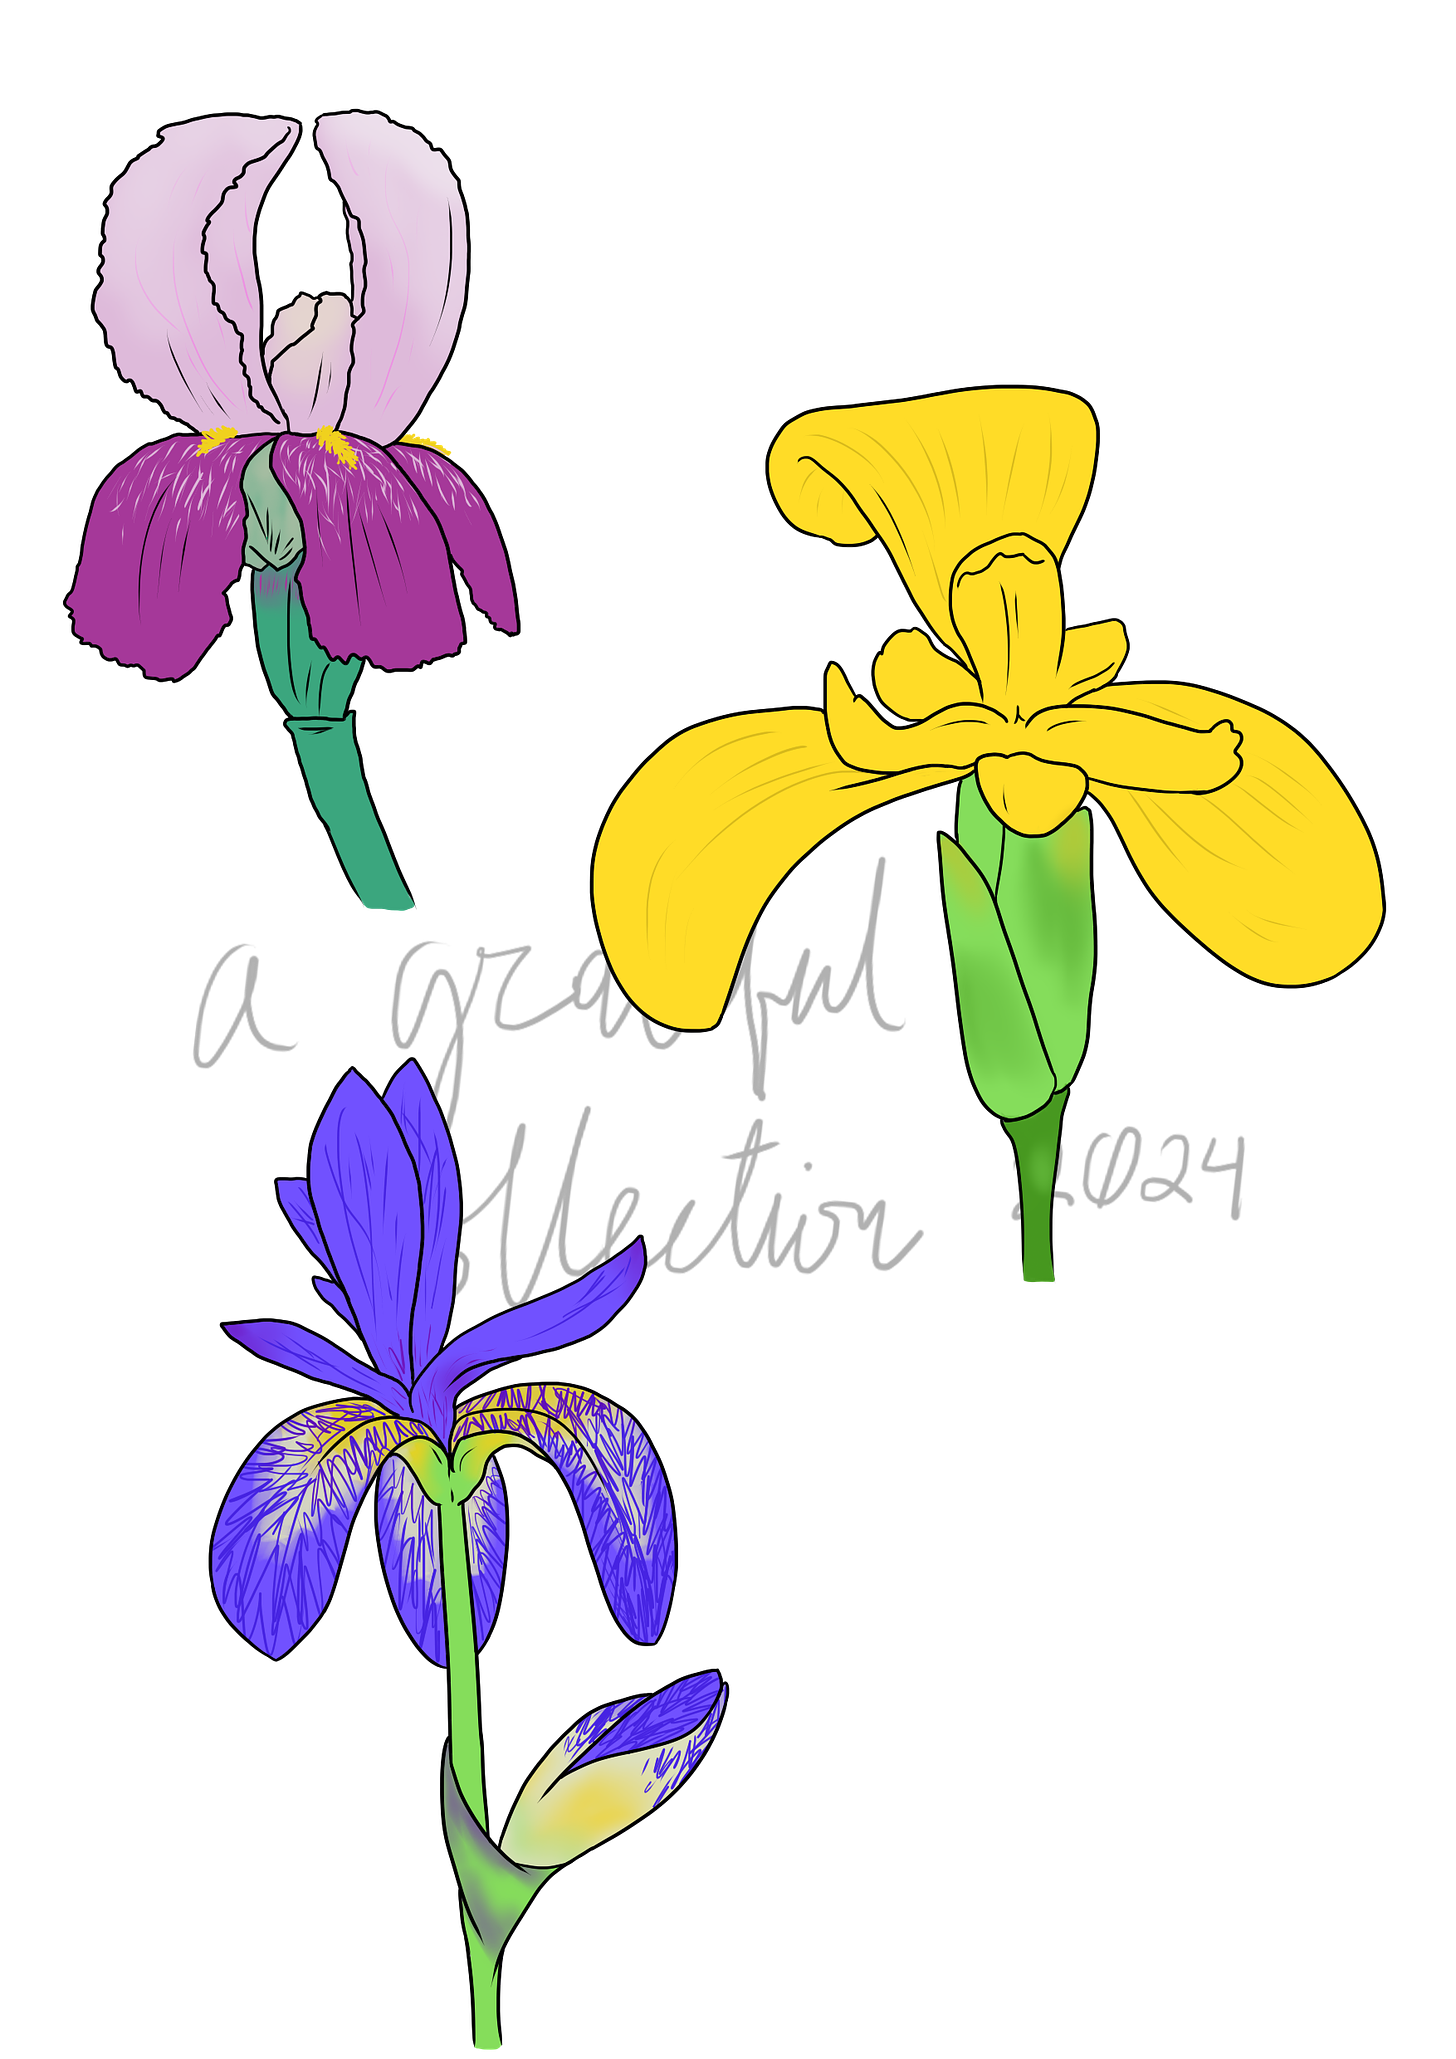 Three different irises: one purple, one yellow, and one bue.